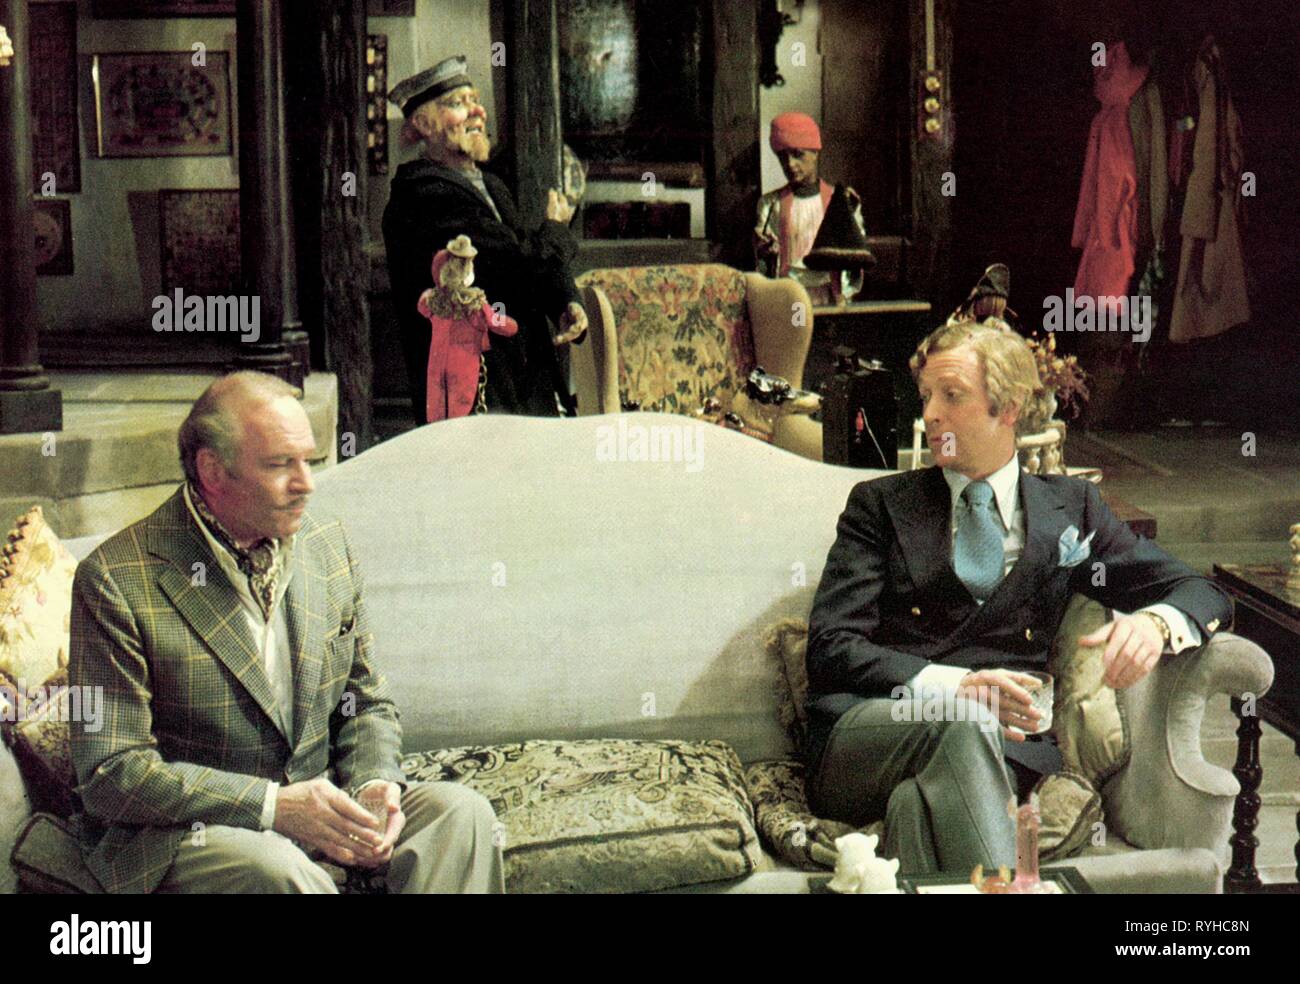 LAURENCE OLIVIER, Michael Caine, SLEUTH, 1972 Banque D'Images